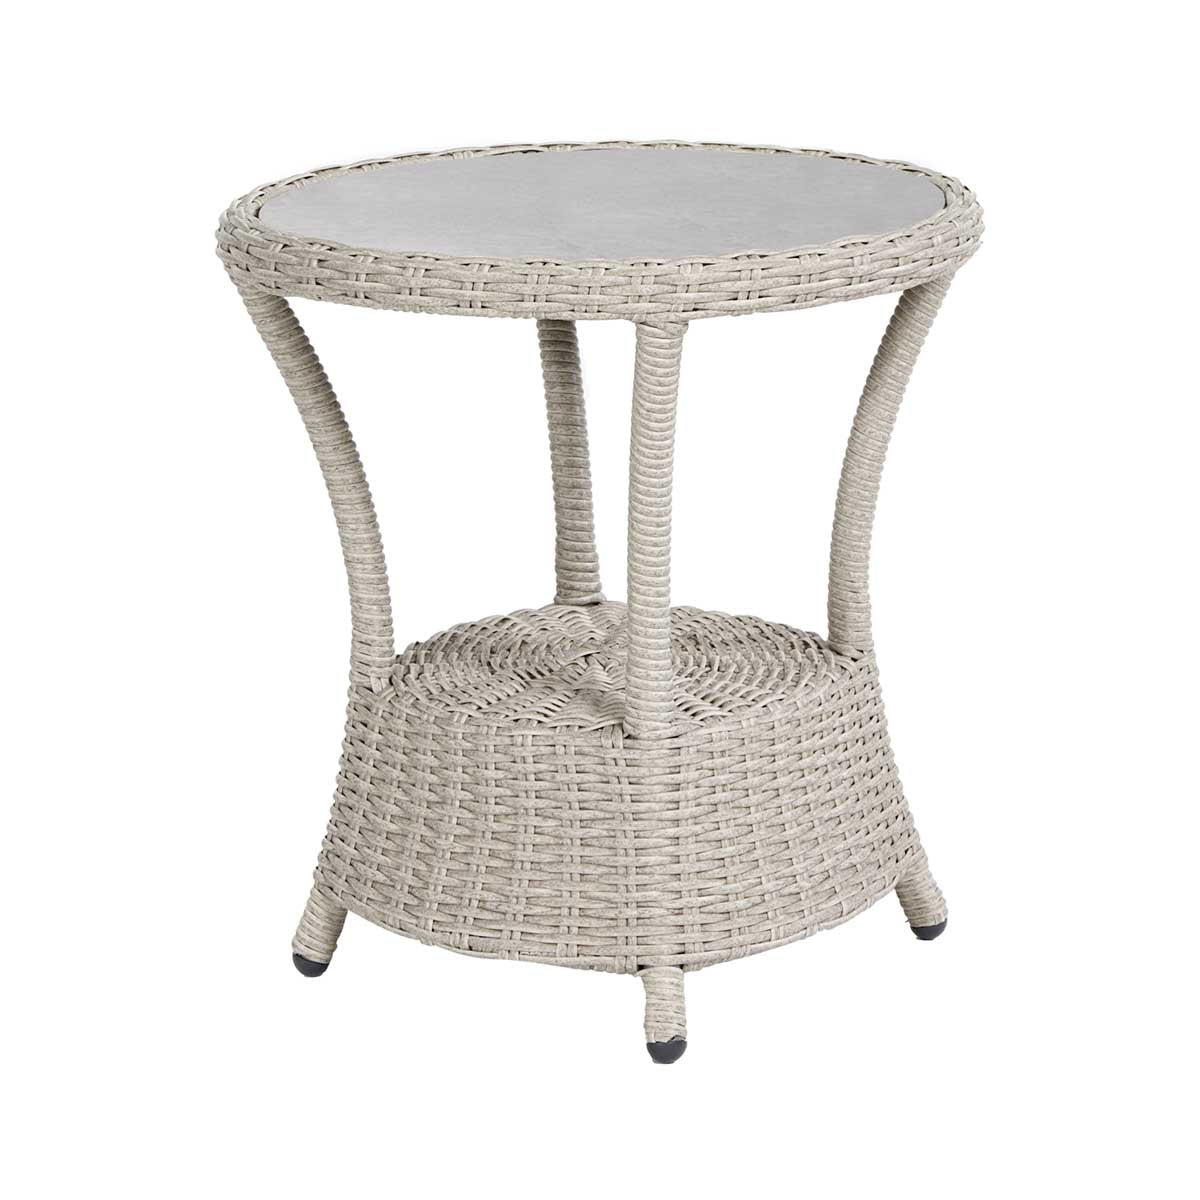 Sumatra Grey Rattan Effect Bistro Set with Ceramic Top Table – Click Style